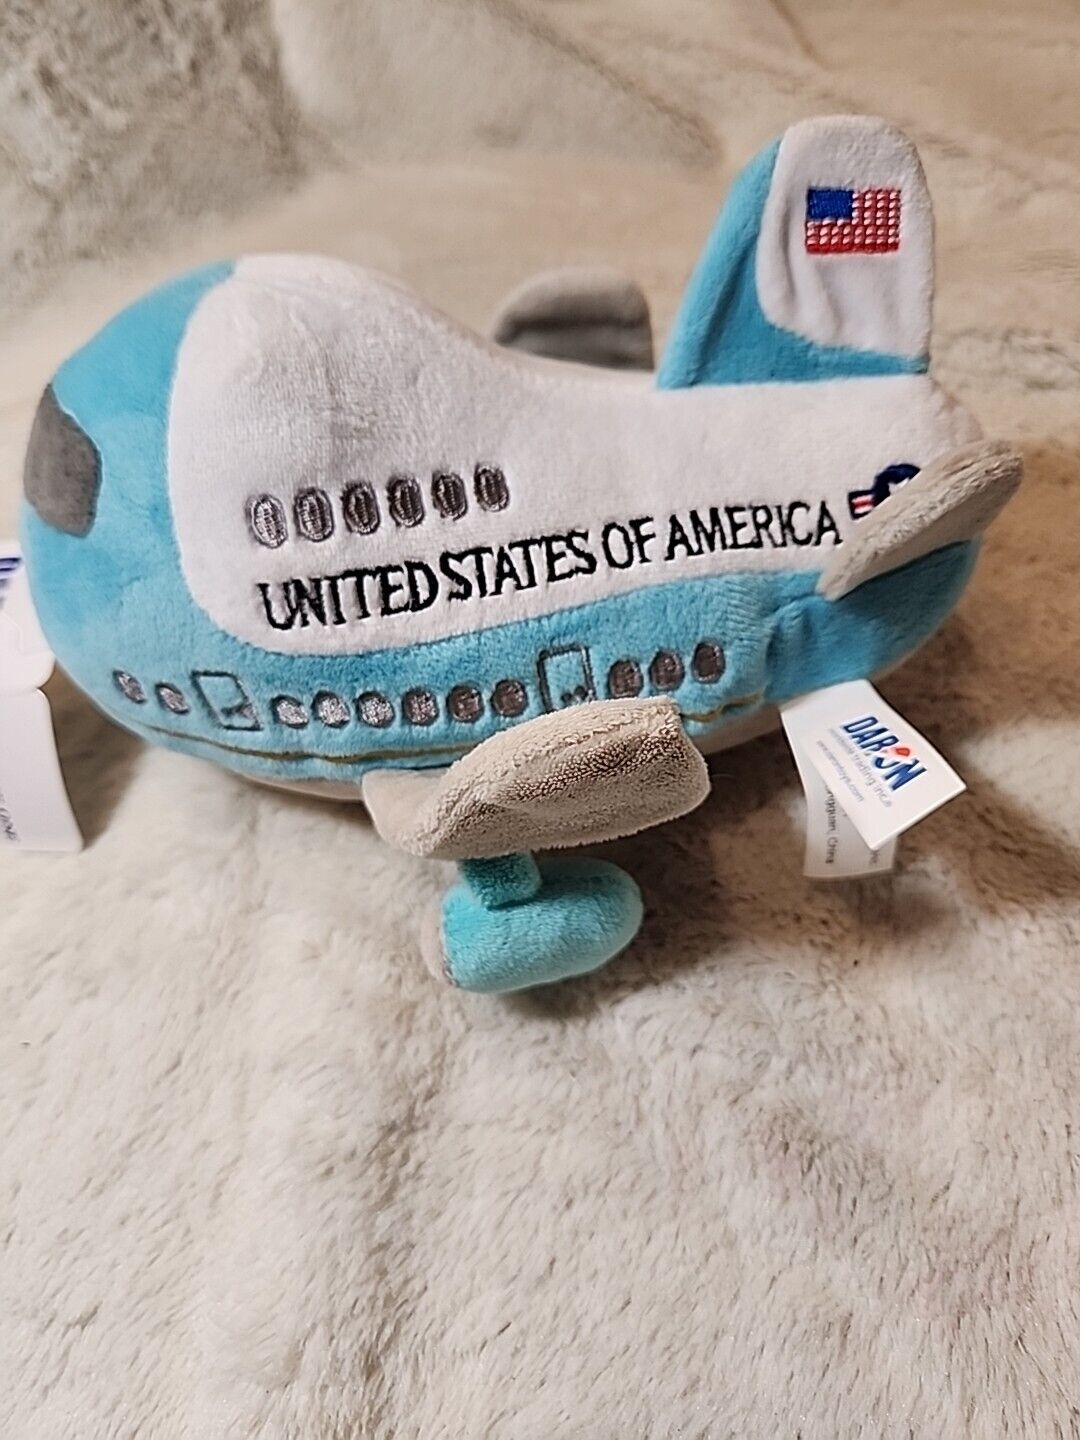 NEW Tag Air Force One Plush Stuffed Airplane United Airlines Daron United States